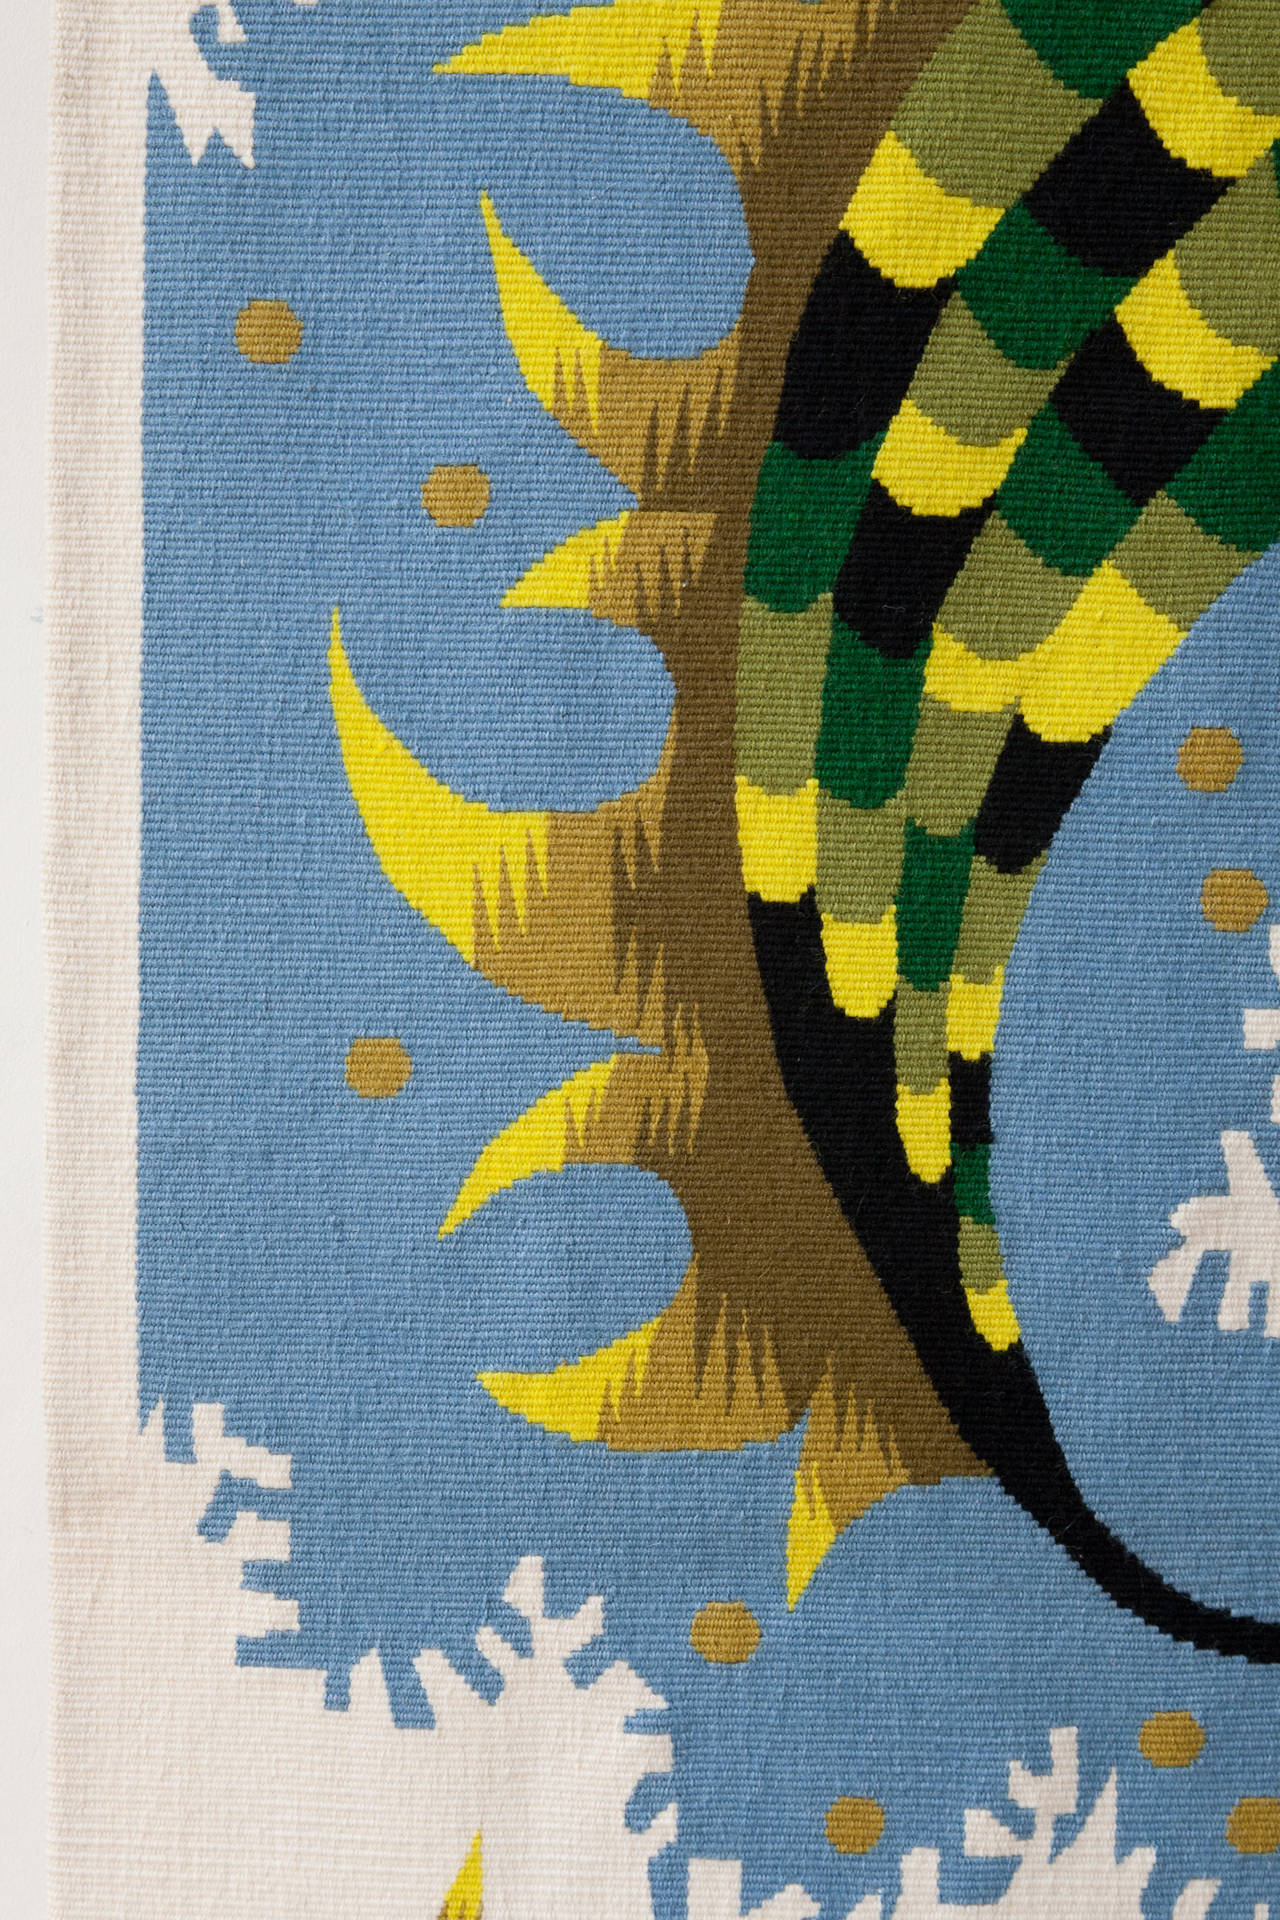 Tapestry woven in wool by the Atelier Pinton in Aubusson  after a cartoon by J. Picart Le Doux. 

Black, yellow and green cockerel on a blue ground with yellow stars.

Label on the rear with the mark of the weavers and signed by J Picart le